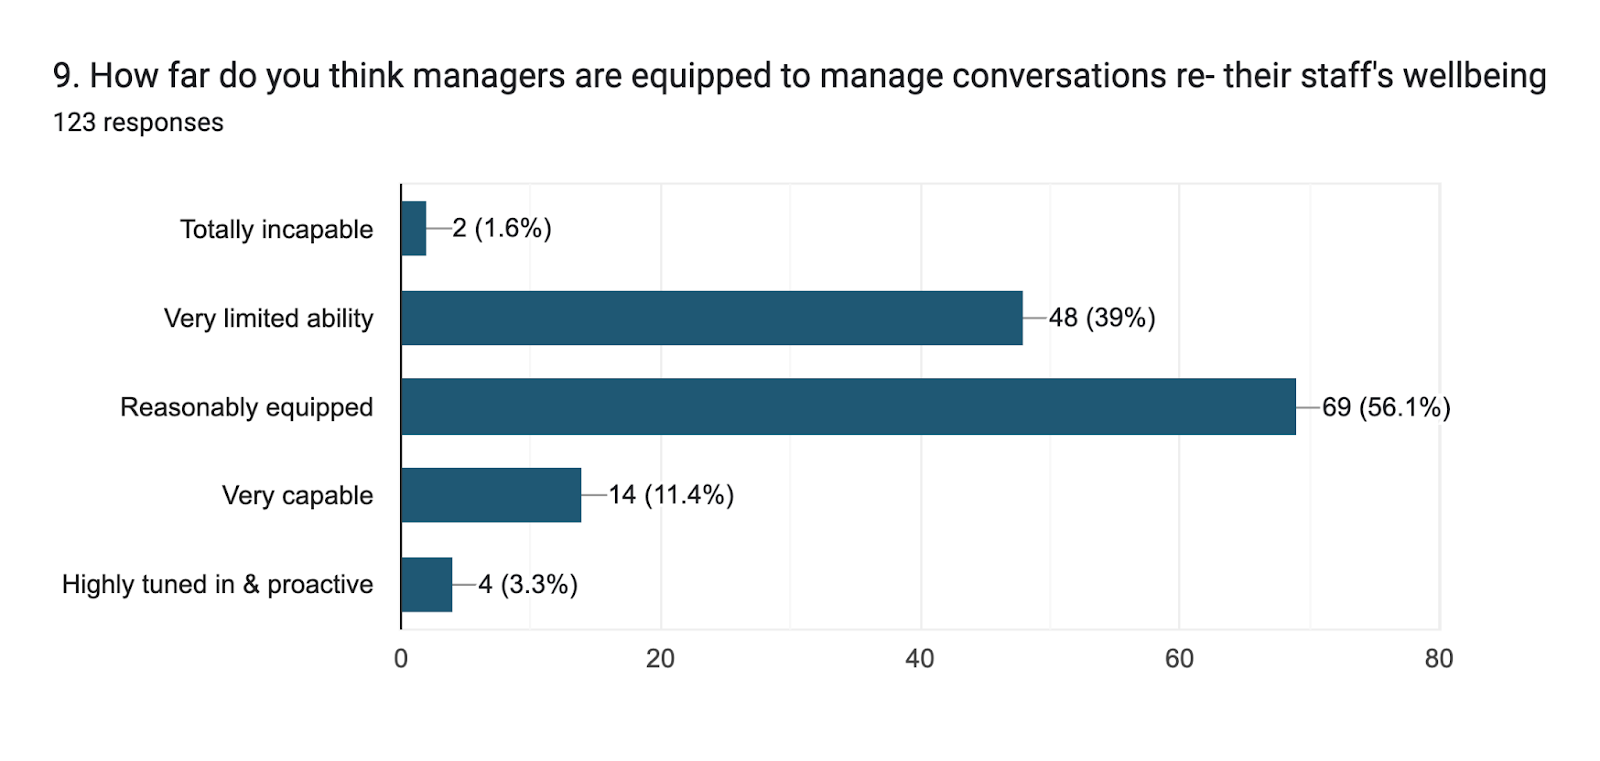 Forms response chart. Question title: 9. How far do you think managers are equipped to manage conversations re- their staff's wellbeing. Number of responses: 123 responses.